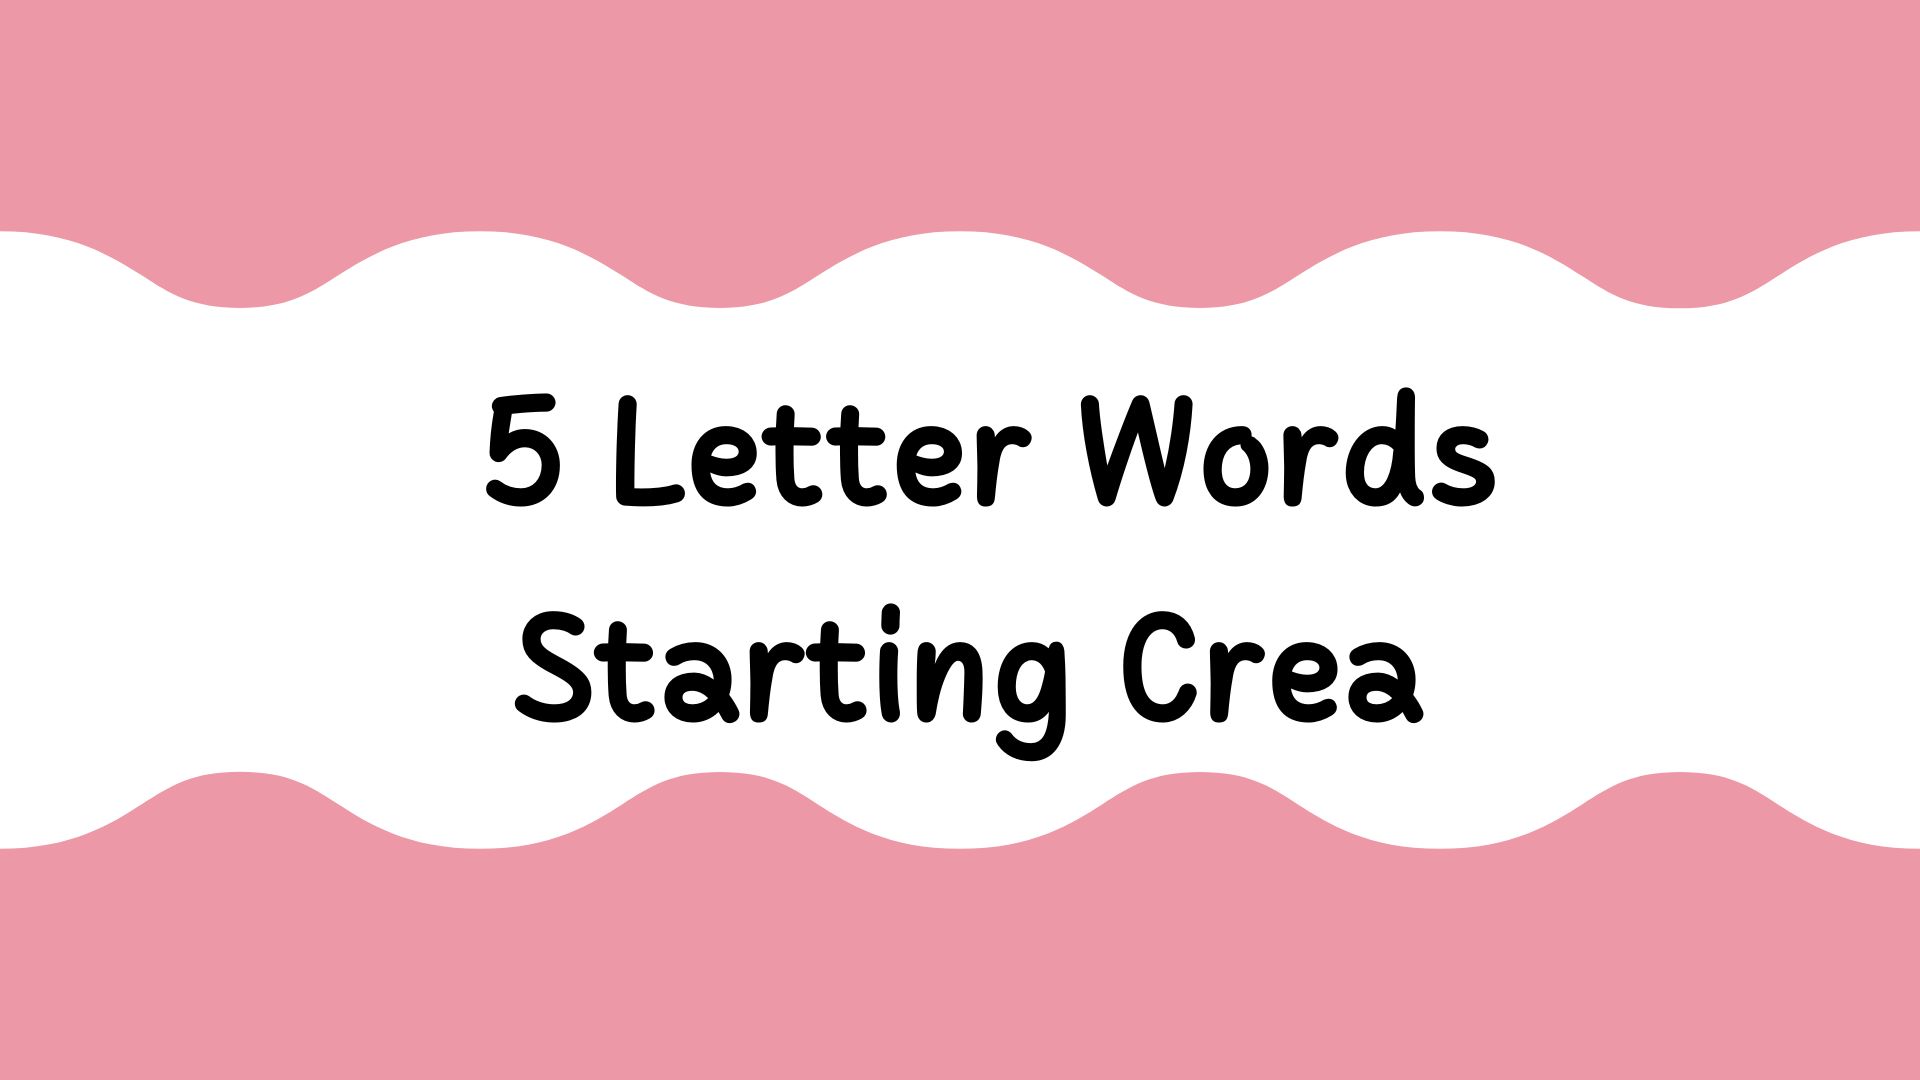 5-letter-words-starting-crea-june-2022-know-the-right-answer